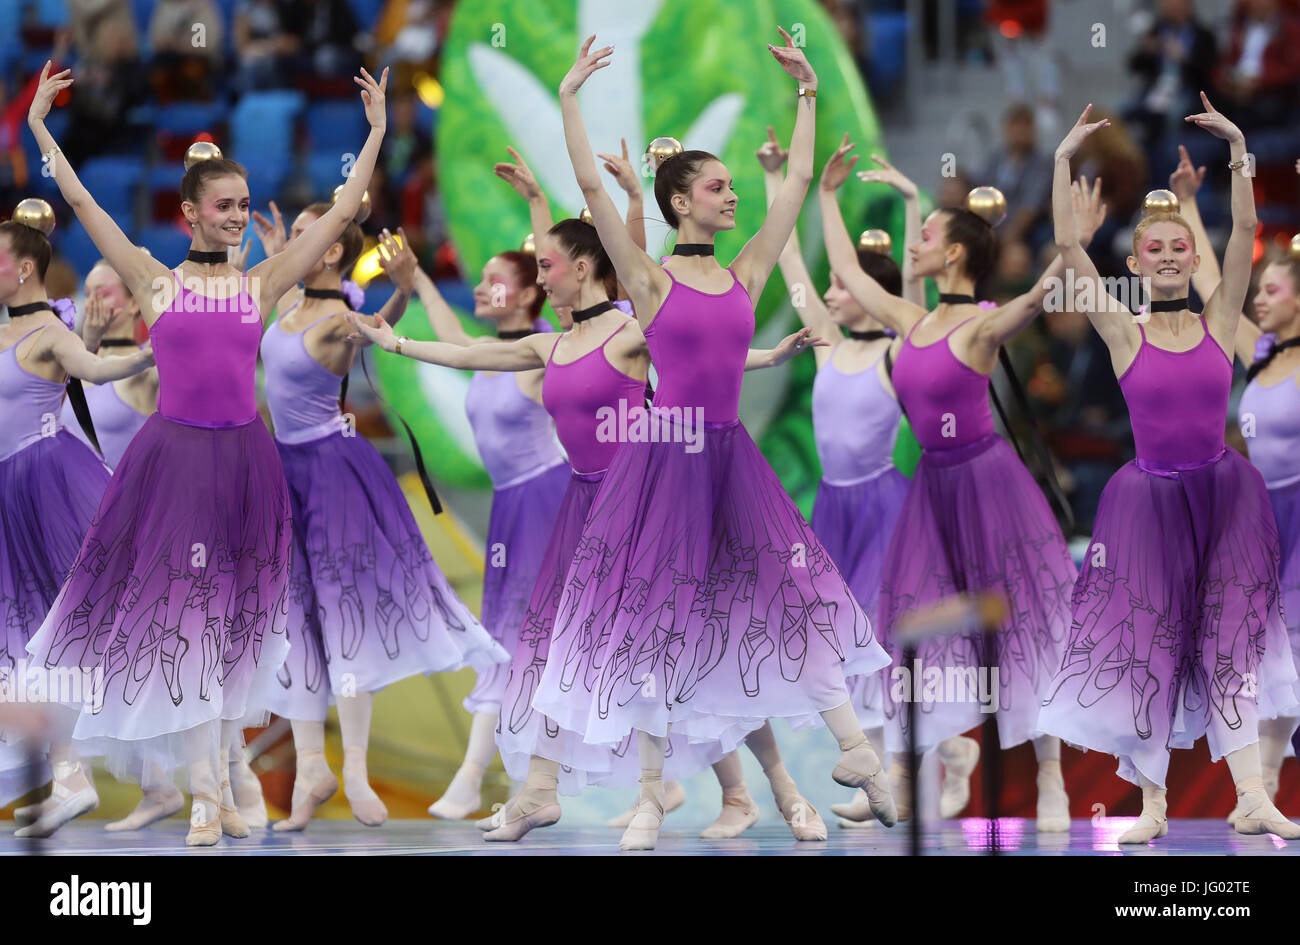 Saint Petersburg, Russia. 2nd July, 2017. Ballet dancers perform during the closing ceremony before the Confederations Cup finale between Chile and Germany at the Saint Petersburg Stadium in Saint Petersburg, Russia, 2 July 2017. Photo: Christian Charisius/dpa/Alamy Live News Stock Photo